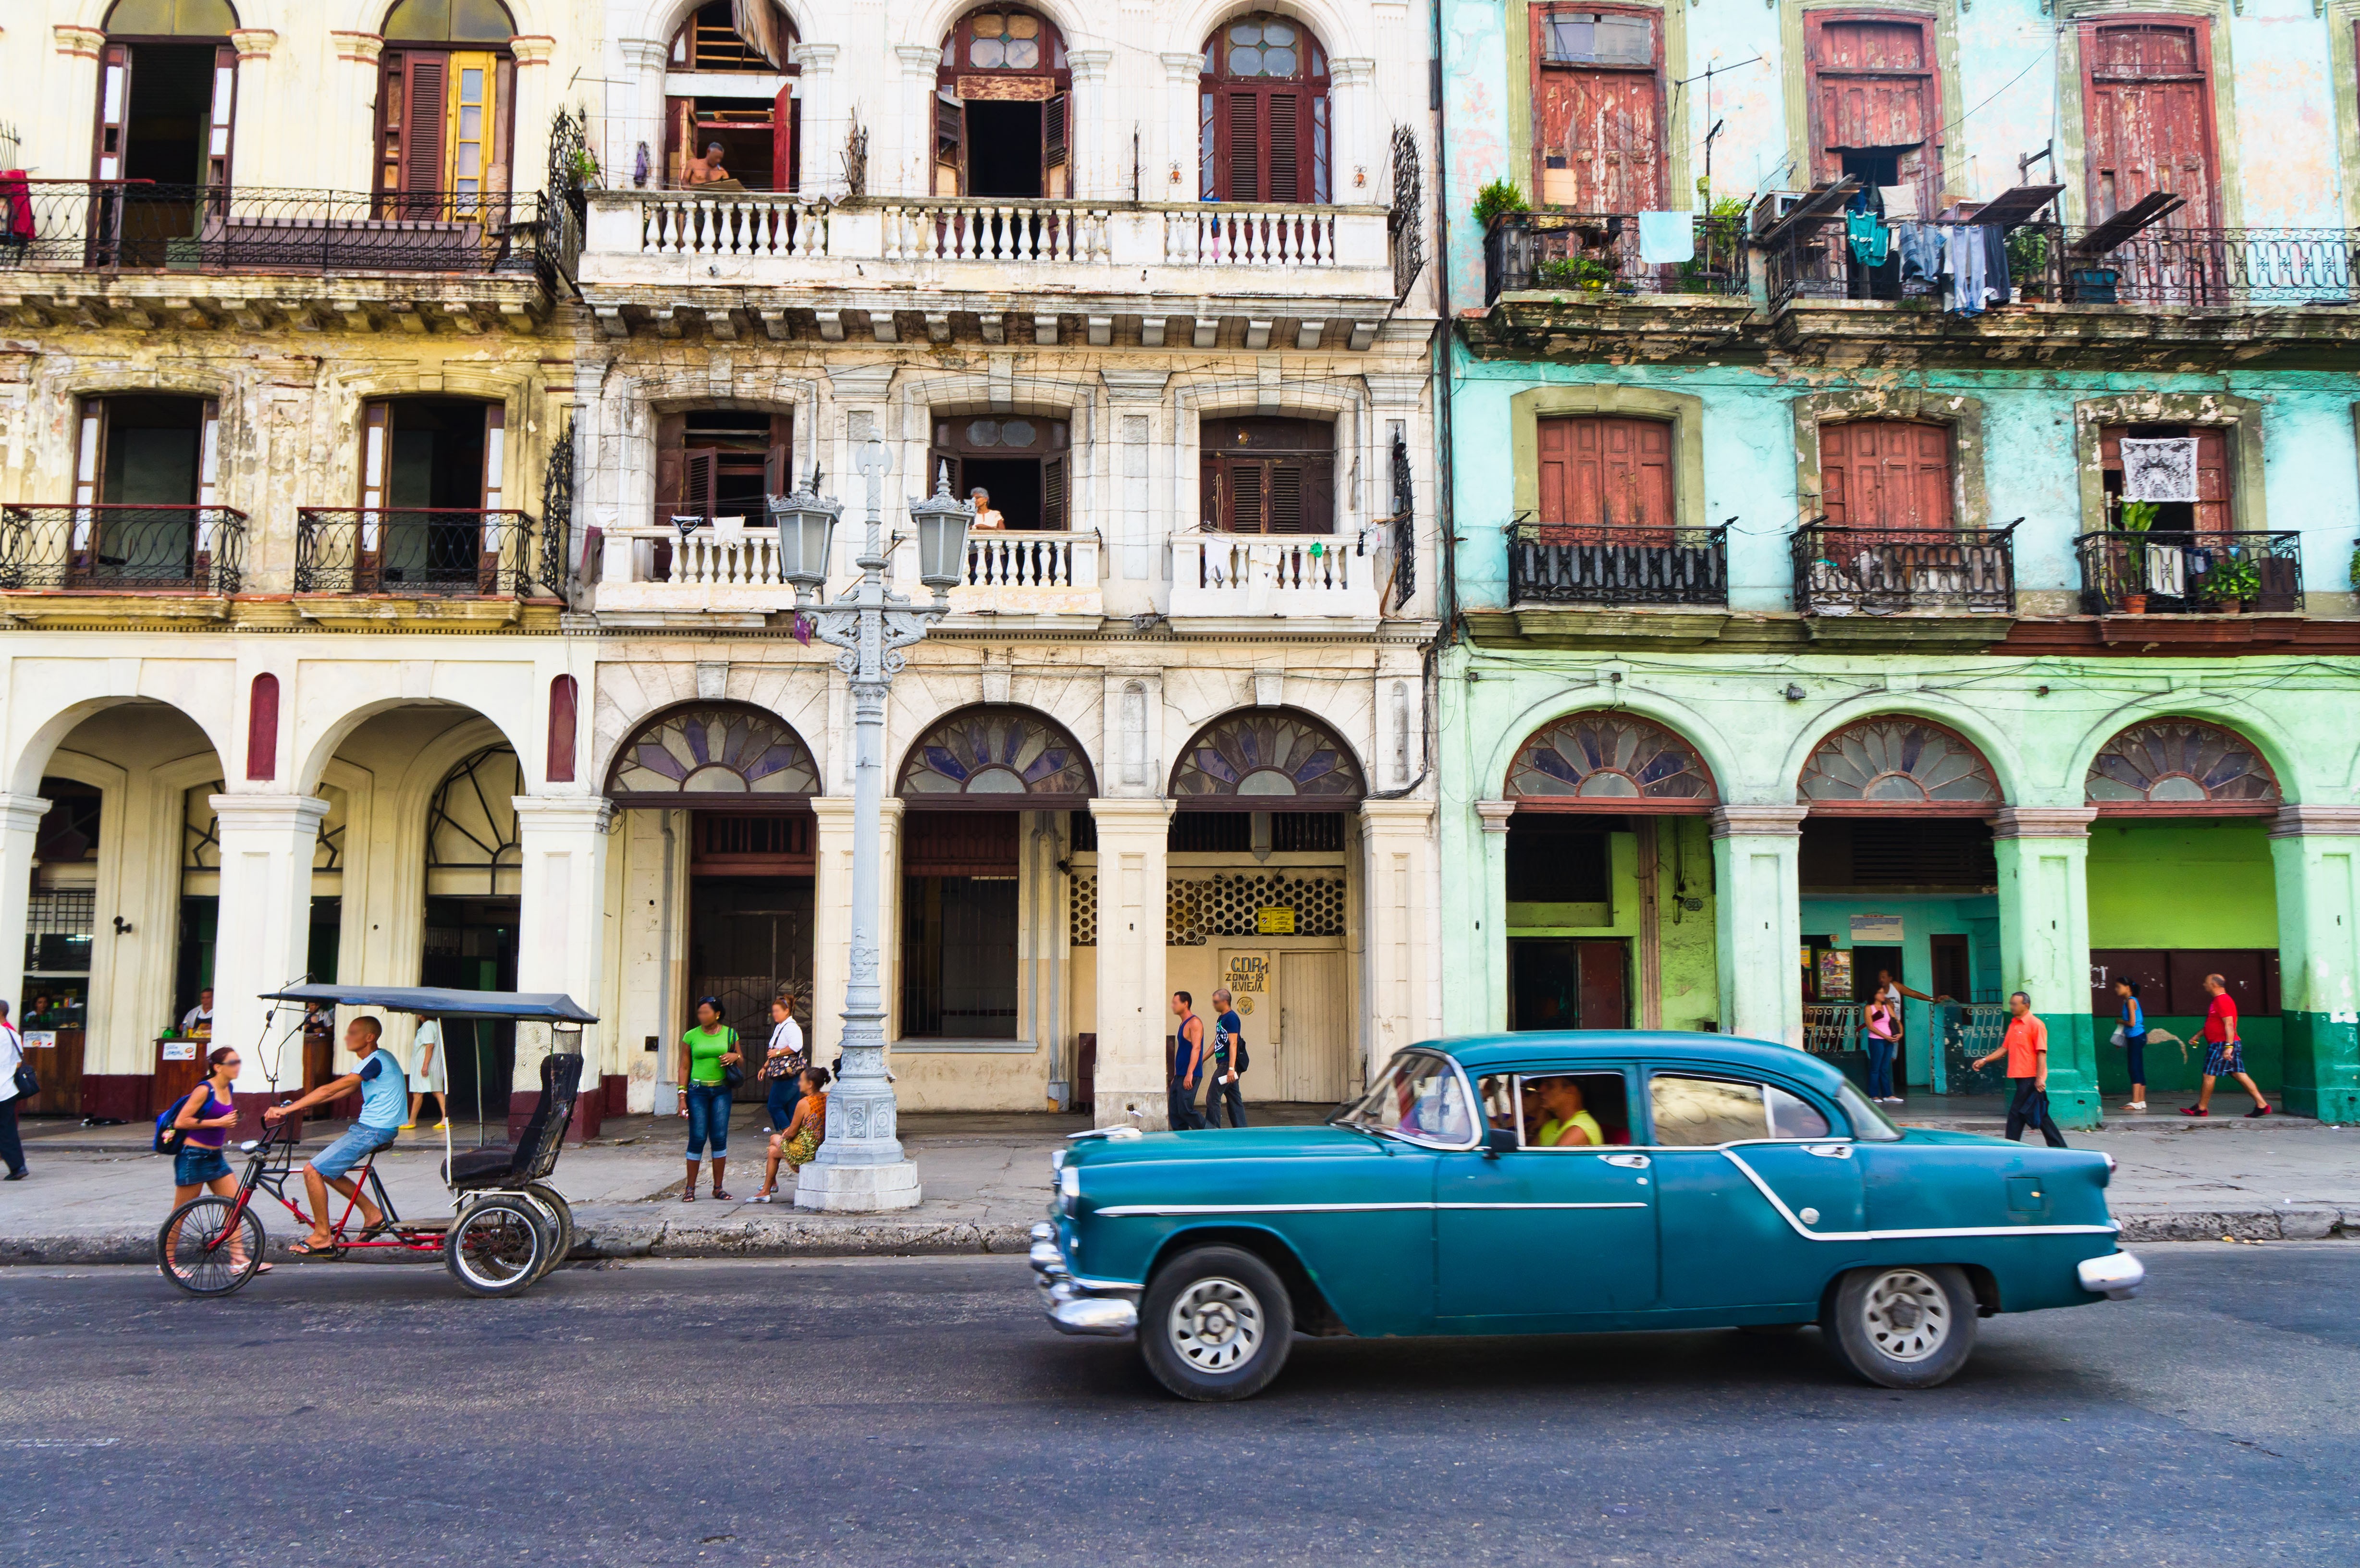 Since its founding by Spanish colonists, Havana has become a byword for Latin American romance and revolutionary nostalgia. Photo: Alamy